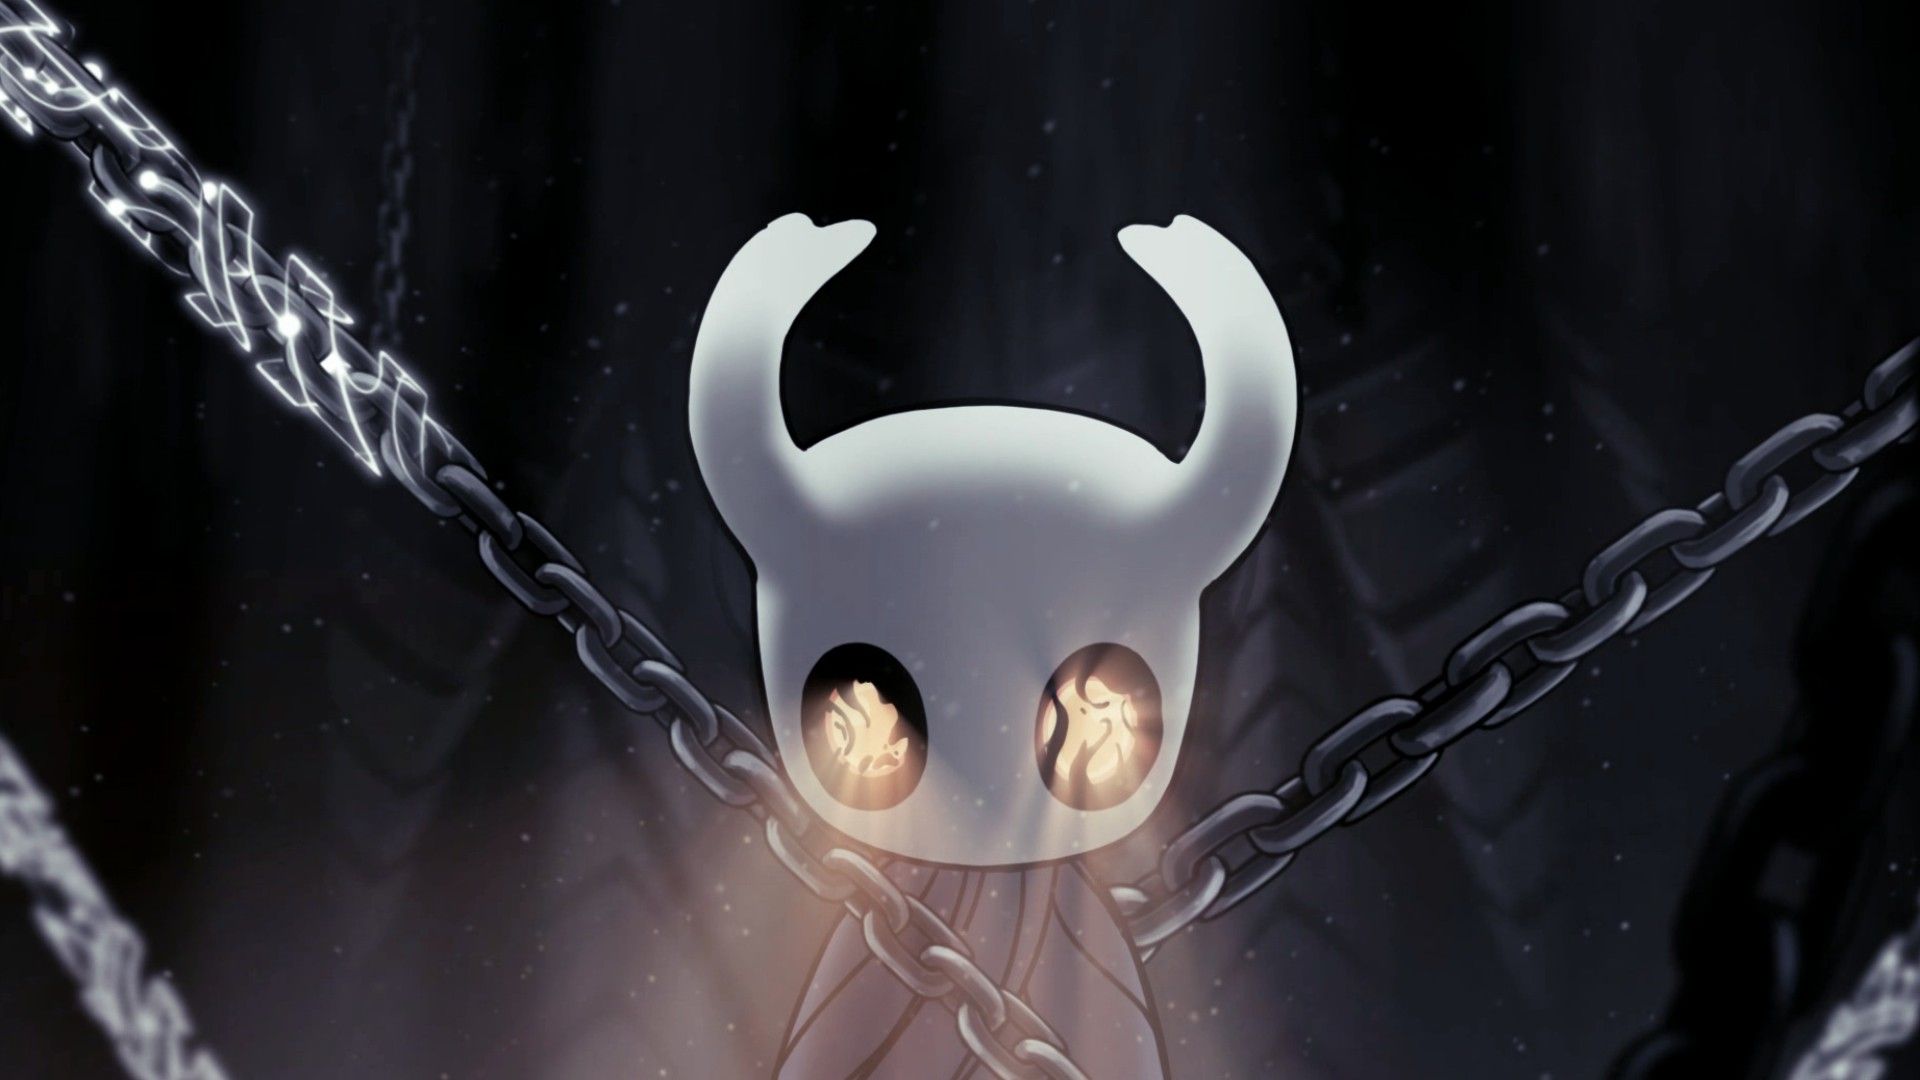 35 Hollow Knight Wallpapers   Download at WallpaperBro